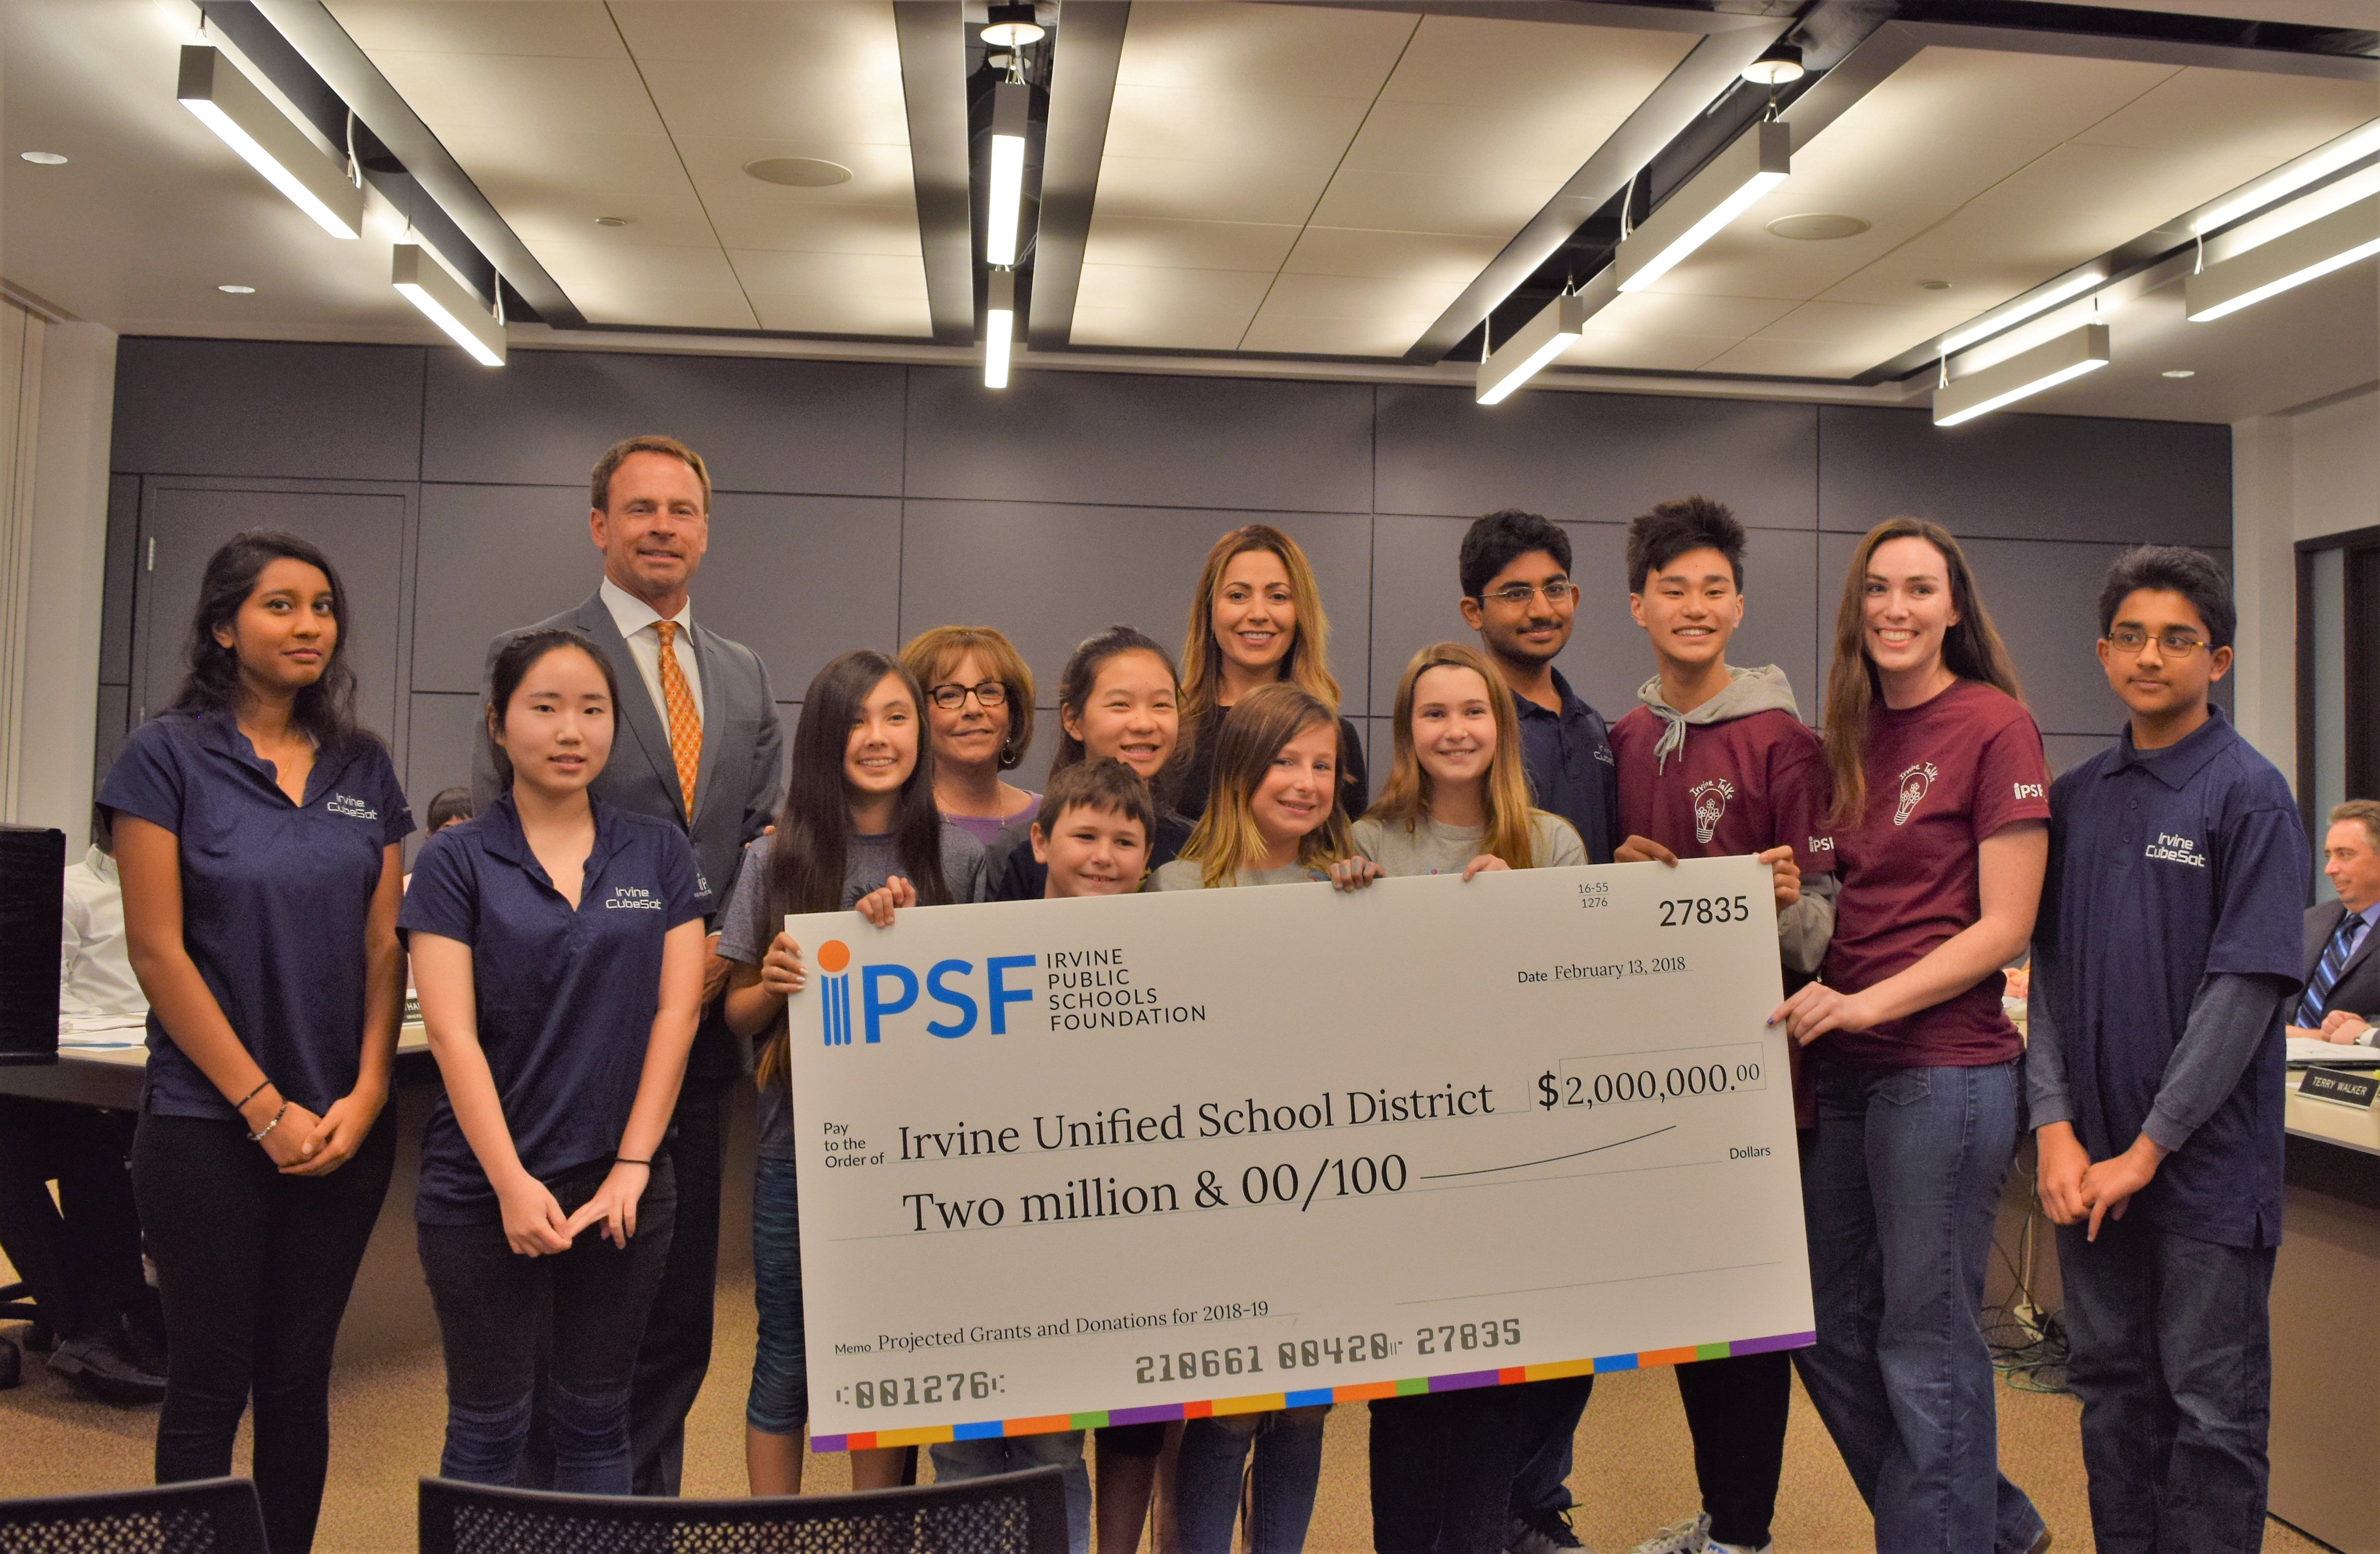 Irvine Public Schools Foundation (IPSF) presented a $2 million check to Irvine Unified School District at their Board of Education meeting with students representing programs that are part of the foundation’s 2018-2019 school year funding commitment inclu